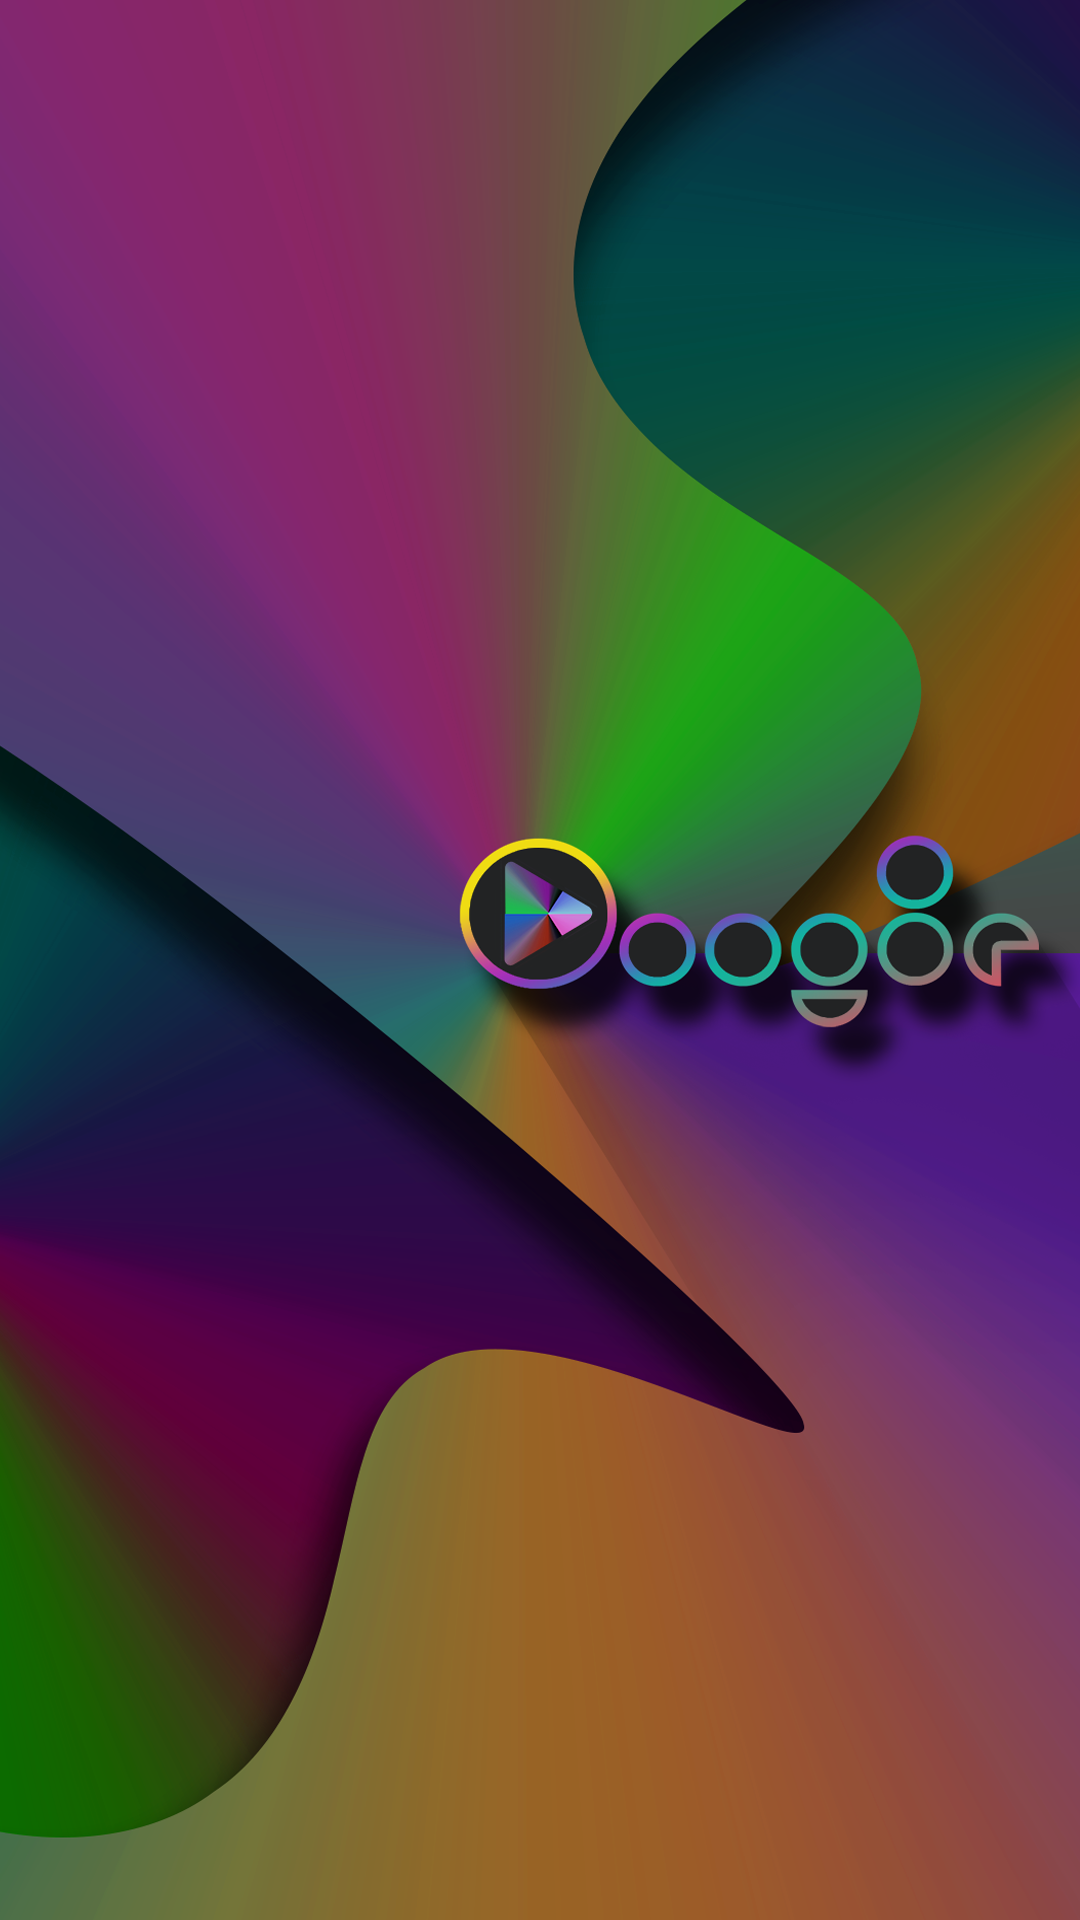 Google Abstract Wallpaper - Graphic Design , HD Wallpaper & Backgrounds